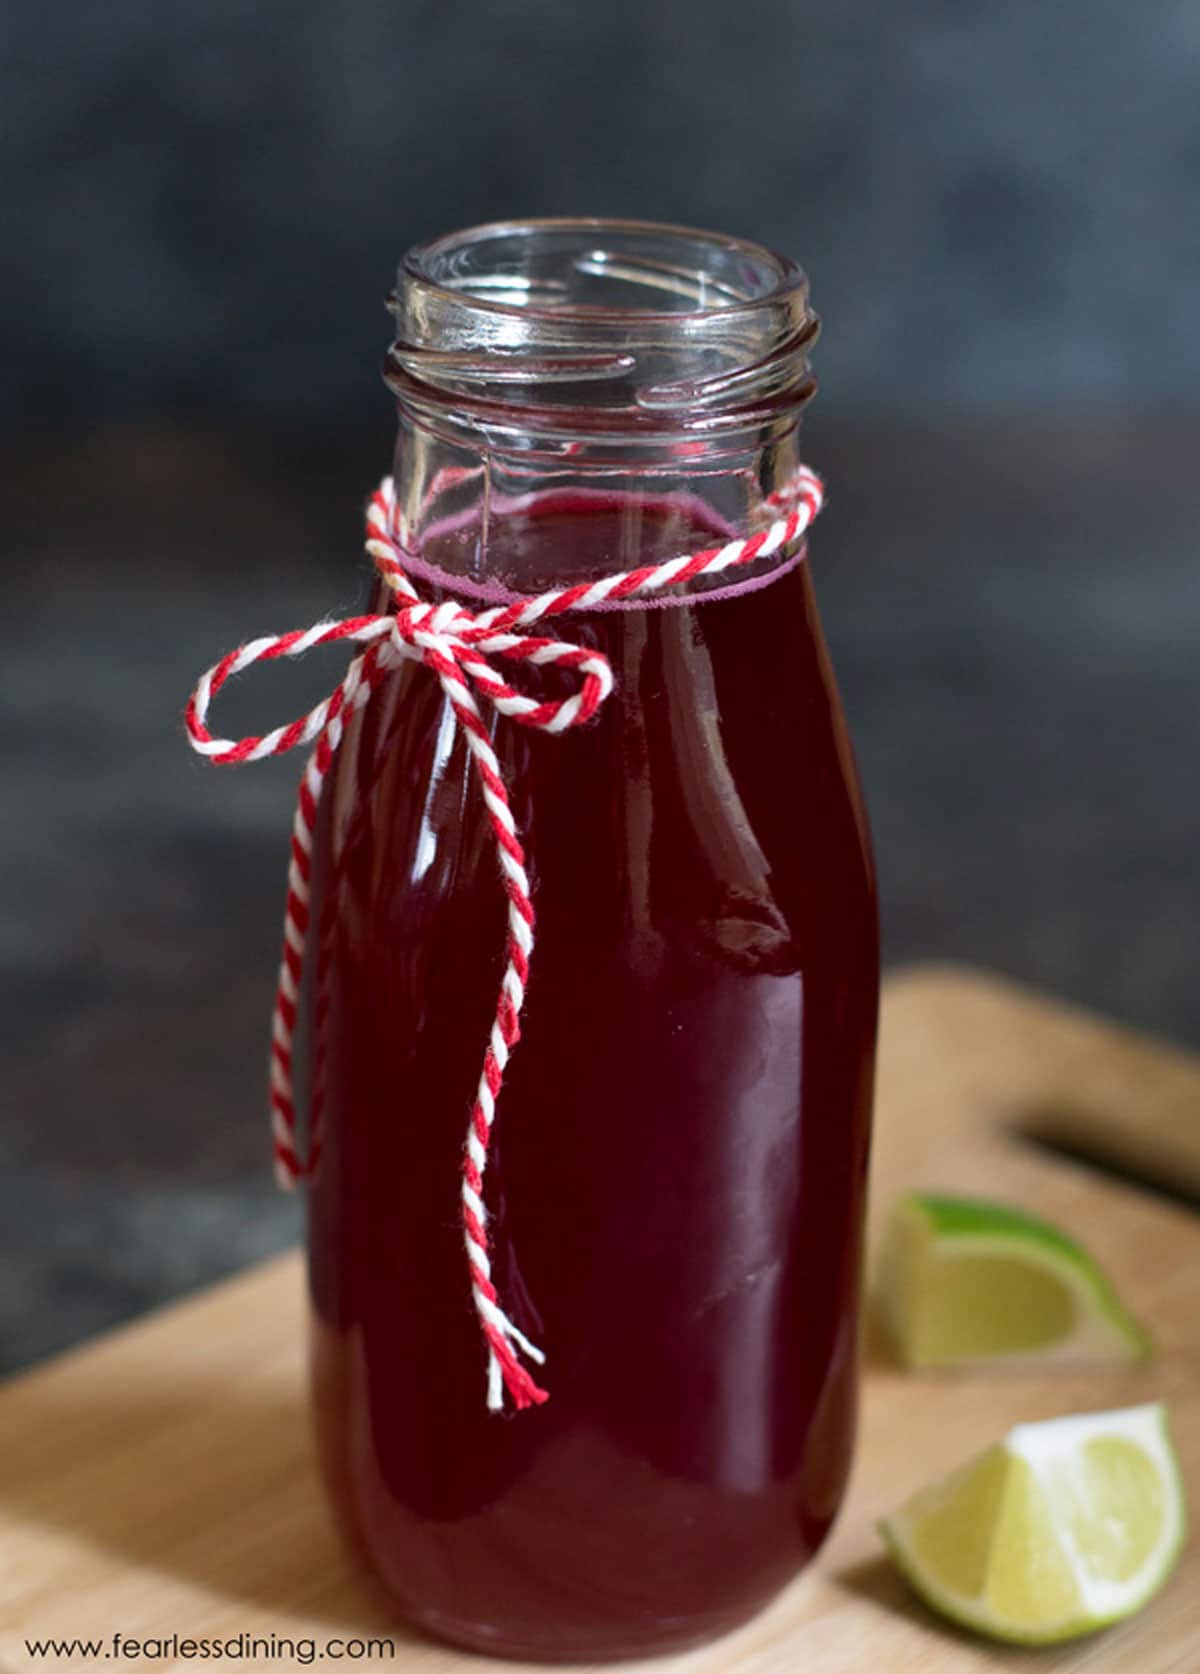 A jar of prickly pear syrup.